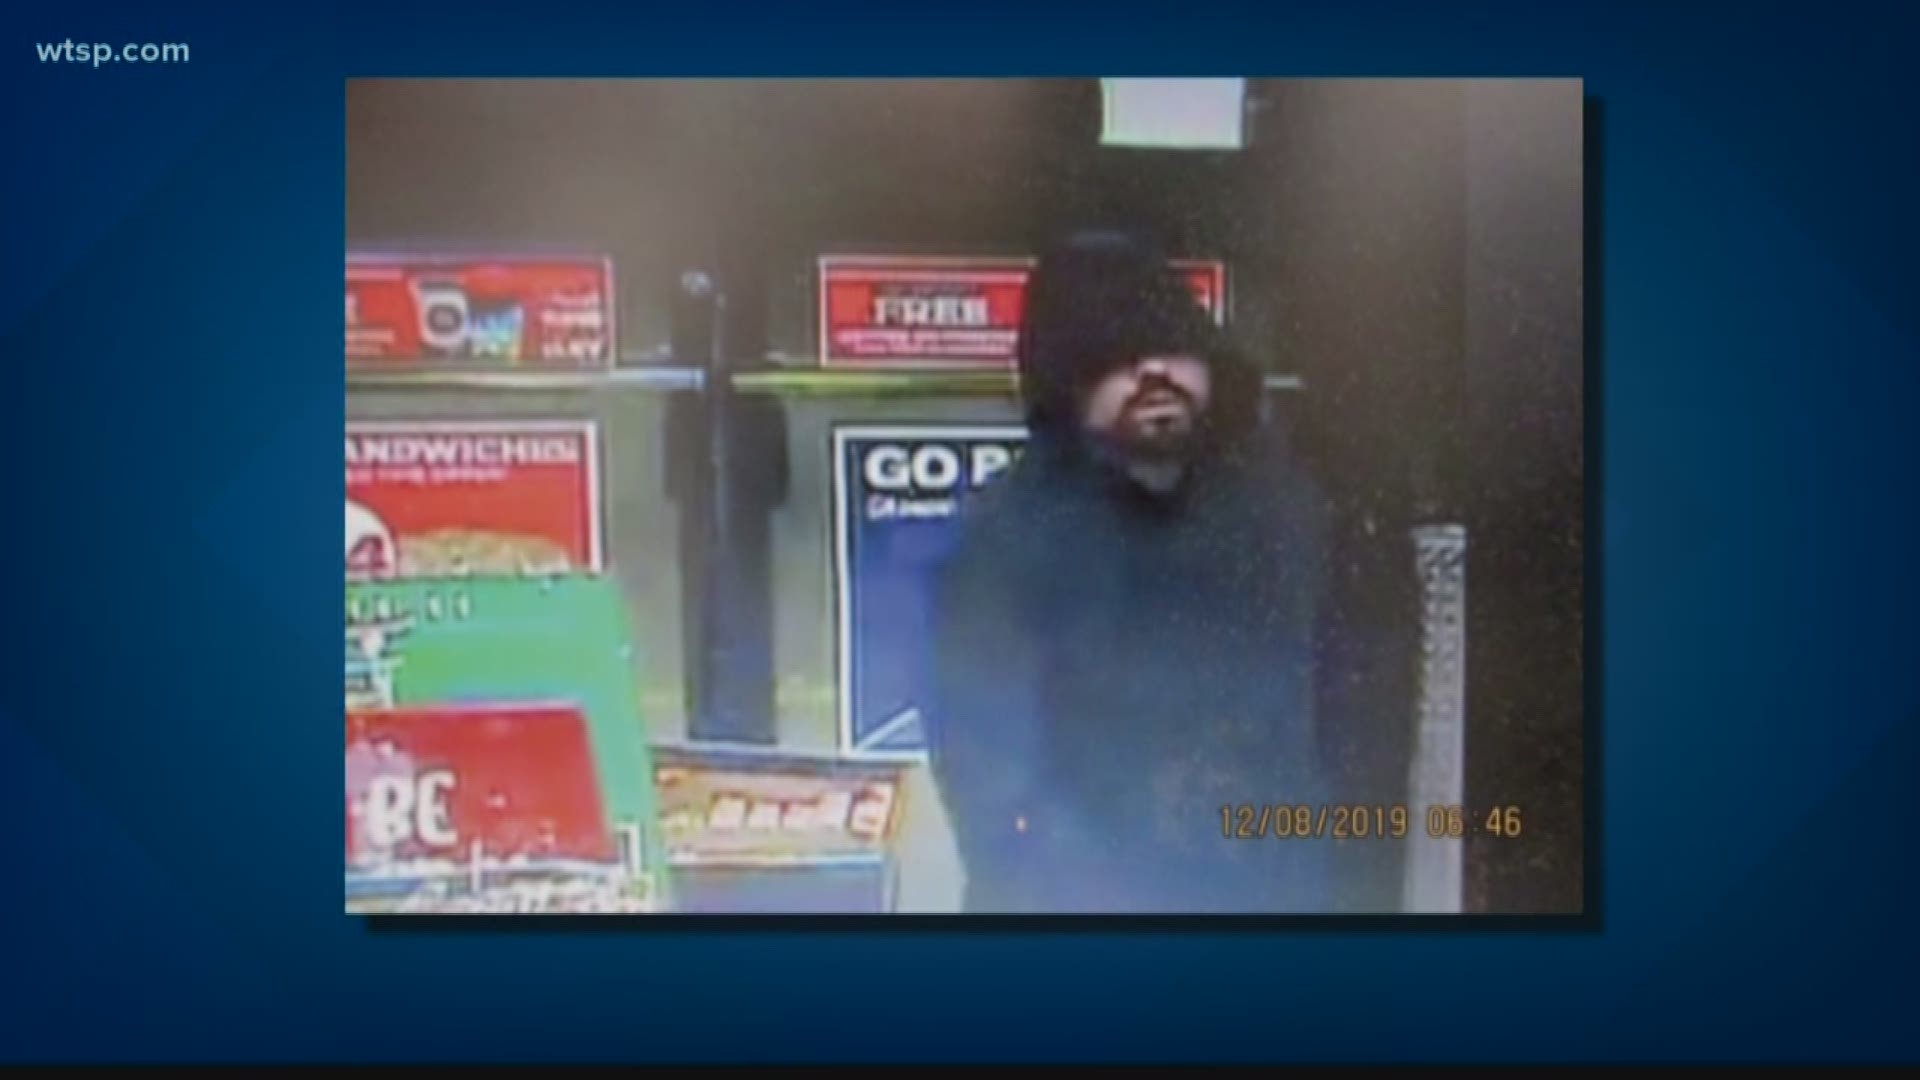 The Hillsborough County Sheriff’s Office wants to know who tried to rob a gas station in Seffner.